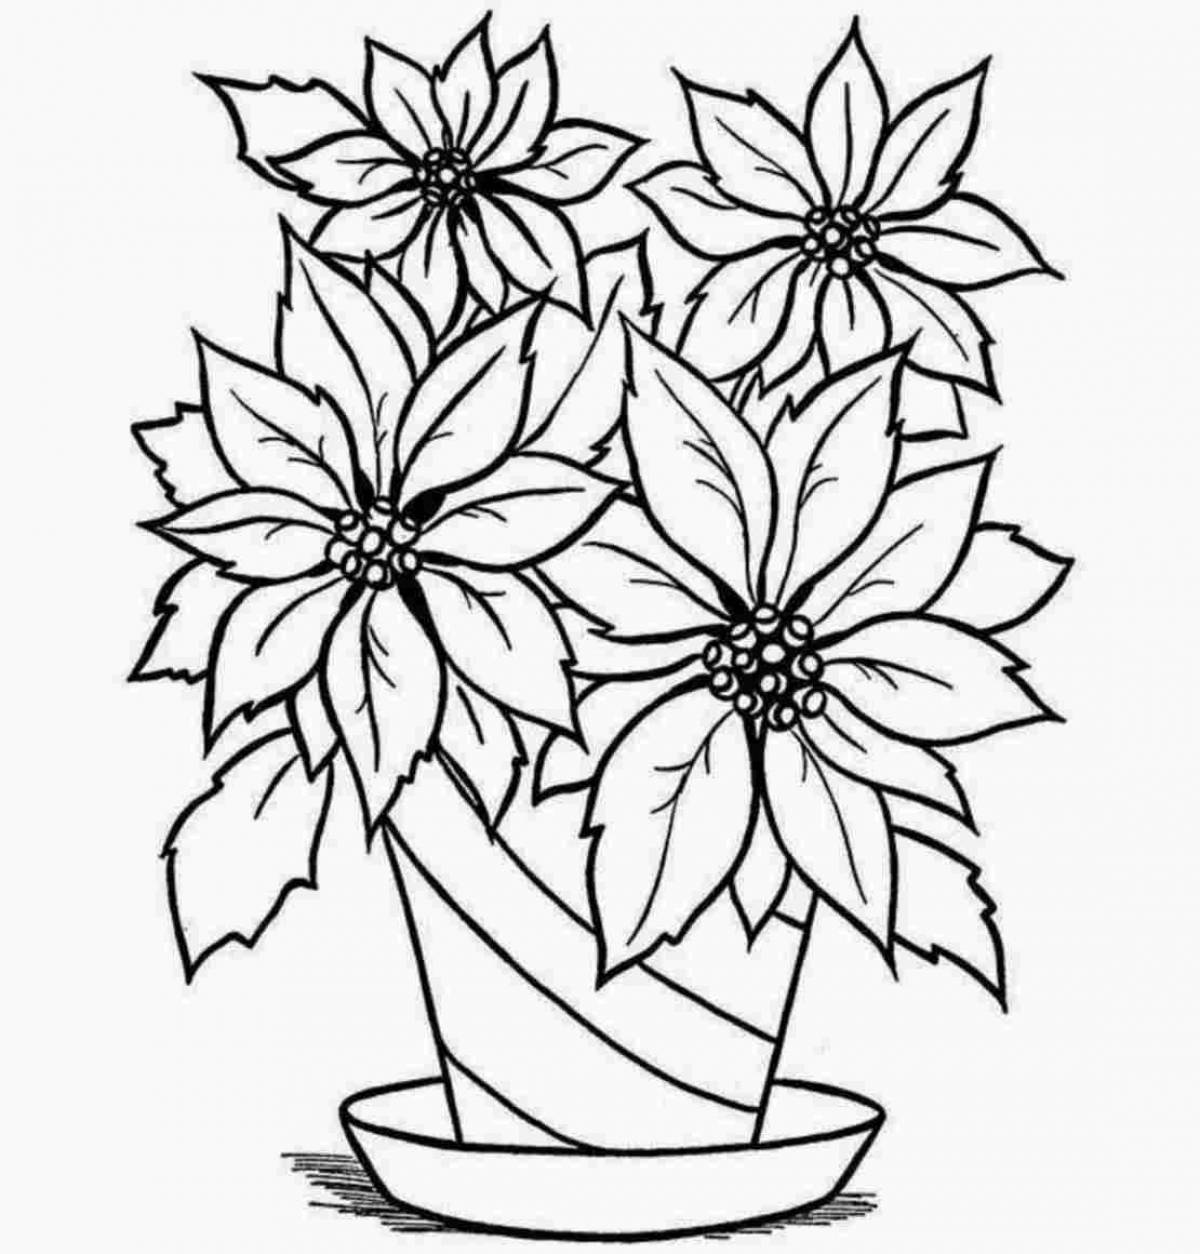 Green houseplant coloring pages